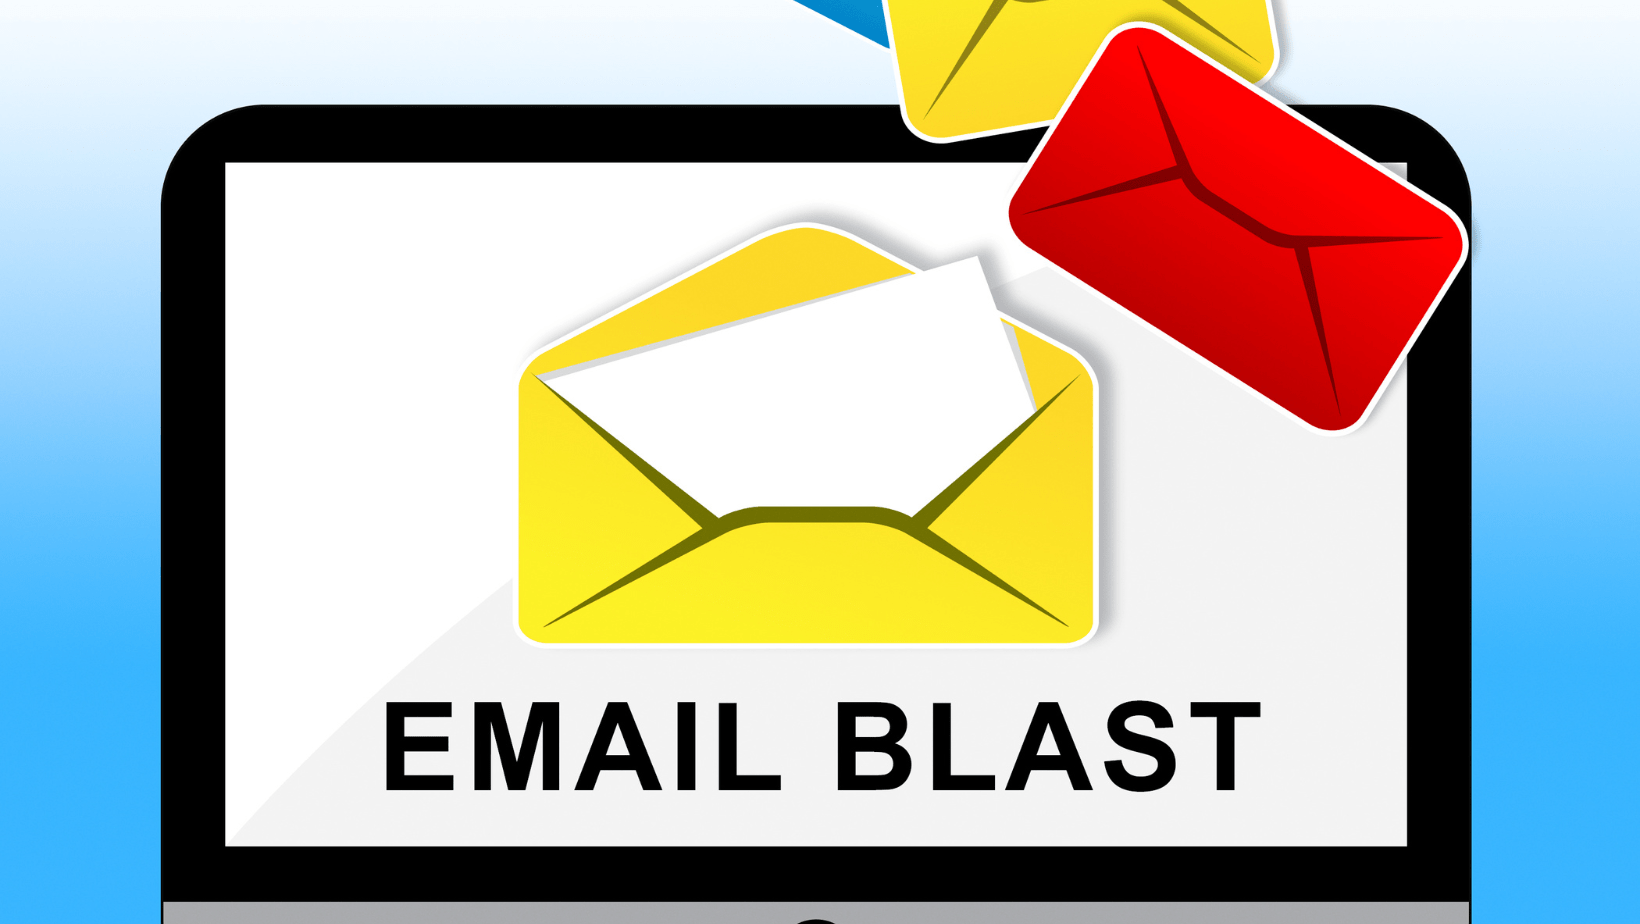 How To Send Email Blast To Your Customers Effectively